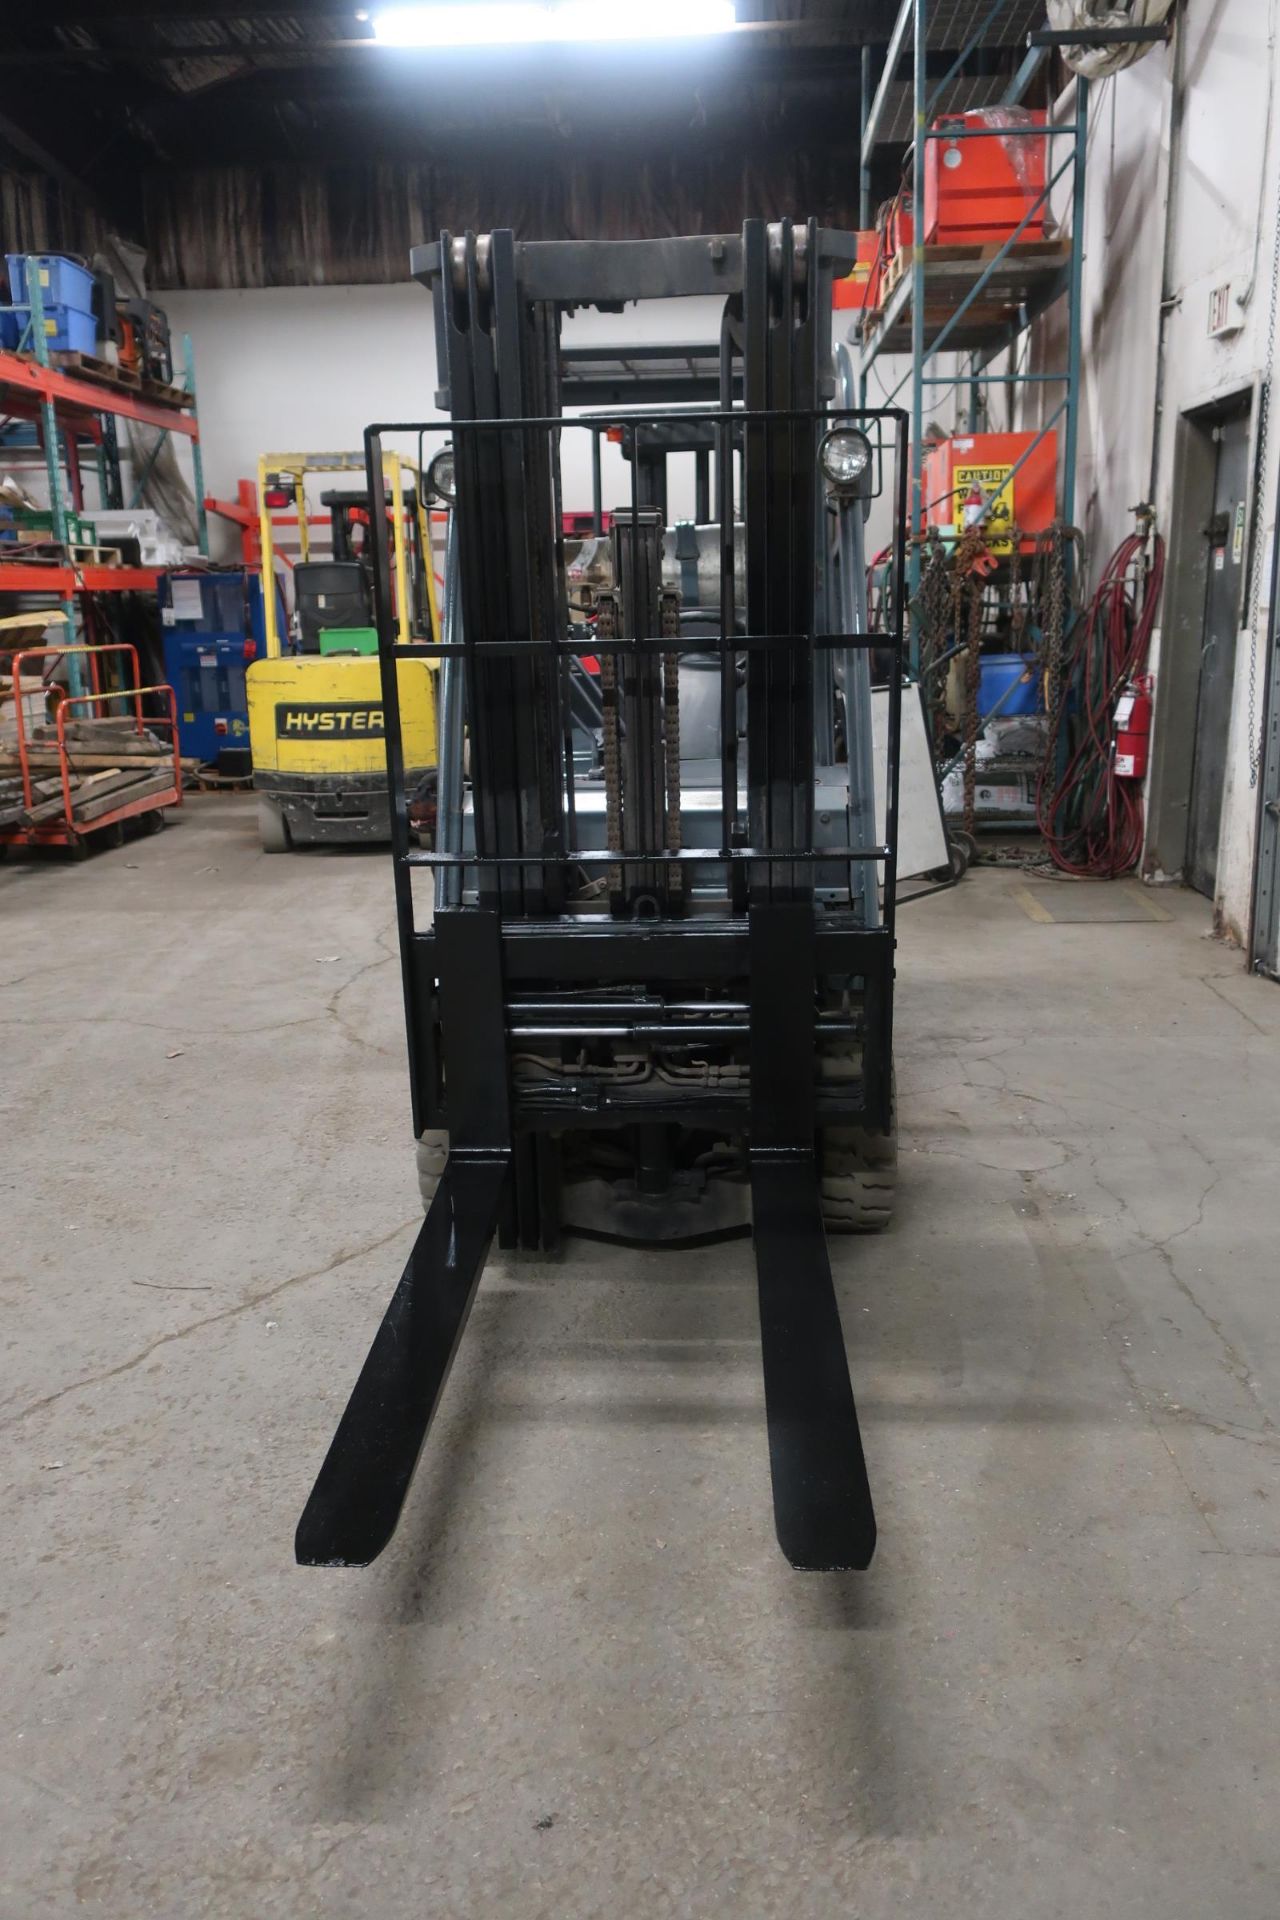 FREE CUSTOMS - Toyota 5000lbs Capacity Forklift with 3-stage mast - LPG (propane unit) - Image 2 of 2